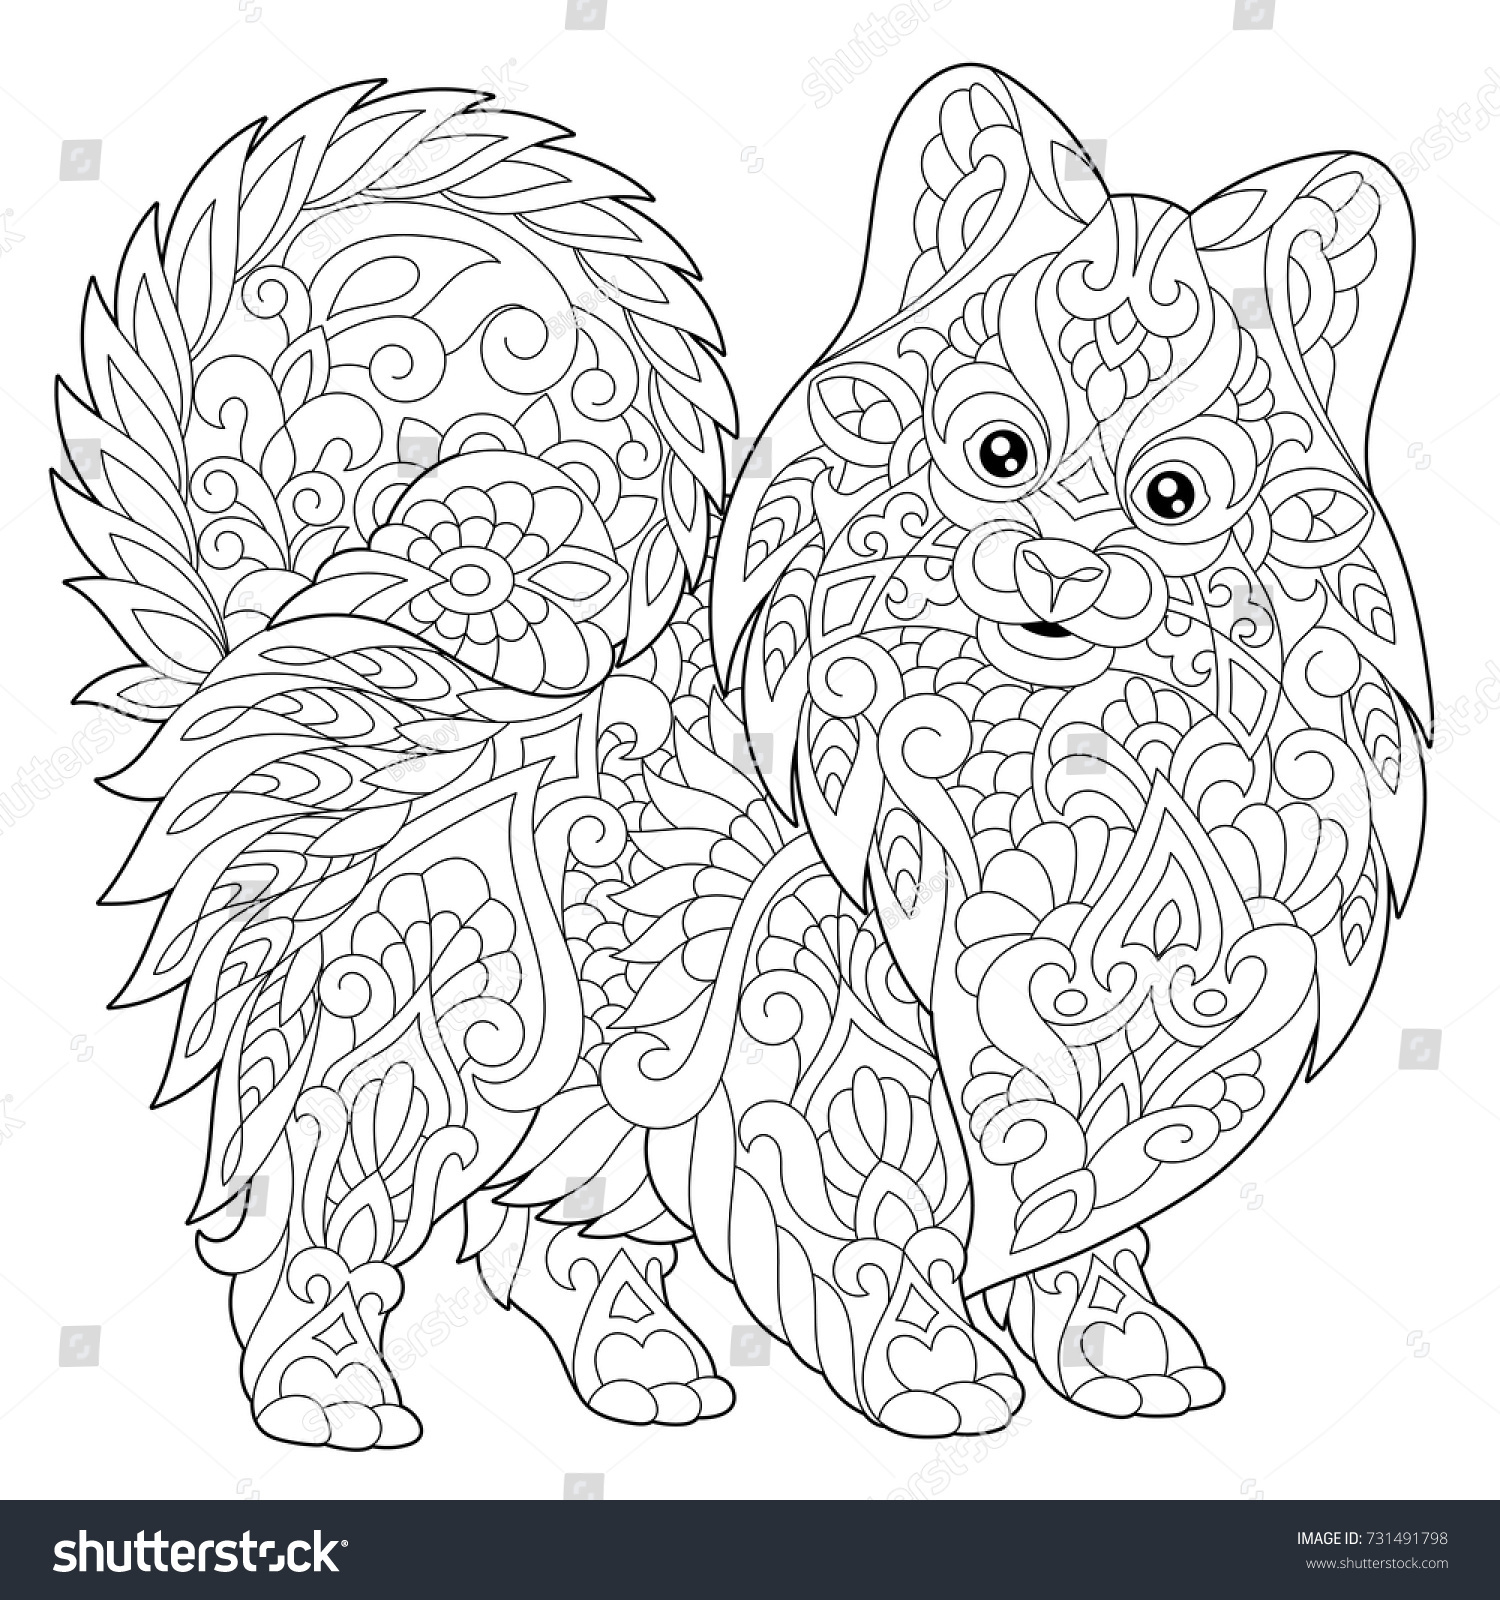 Download Coloring Page Pomeranian Dog Symbol 2018 Stock Vector 731491798 - Shutterstock